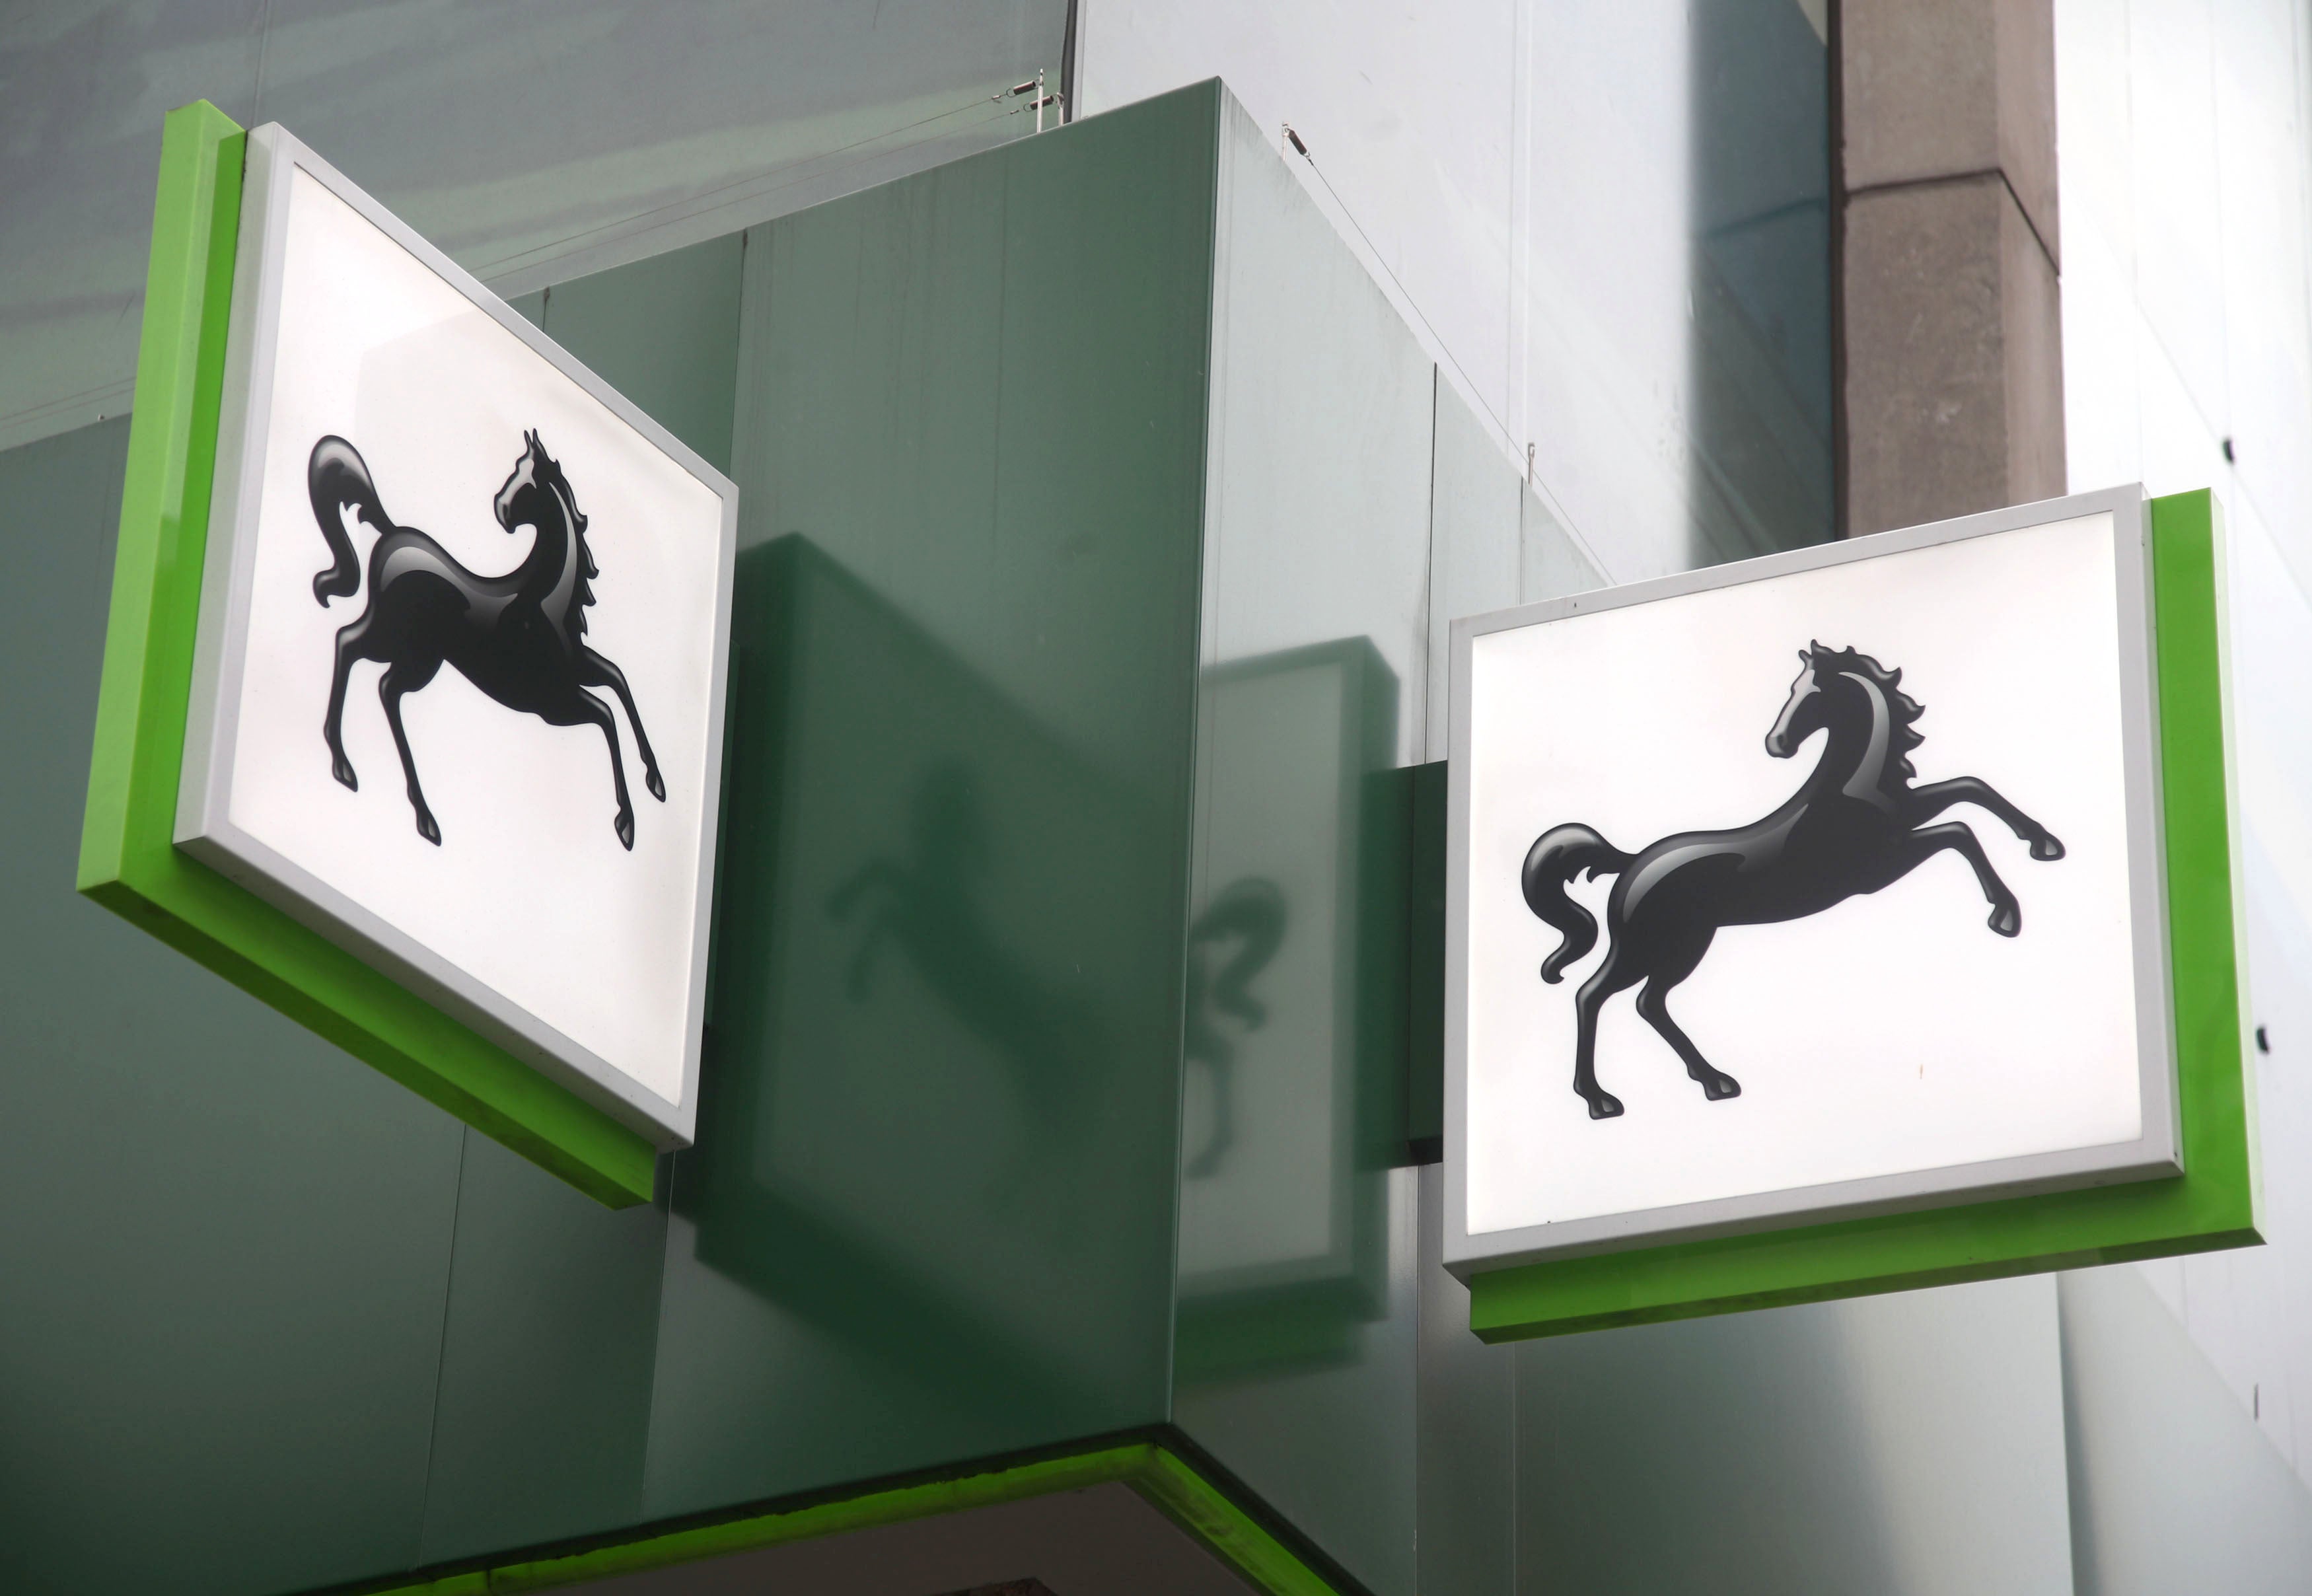 Lloyds Banking Group has revealed it swung to a £3.9bn half-year profit from a £602m loss a year ago as it cut bad debt provisions thanks to the UK’s economic recovery (Yui Mok/PA)